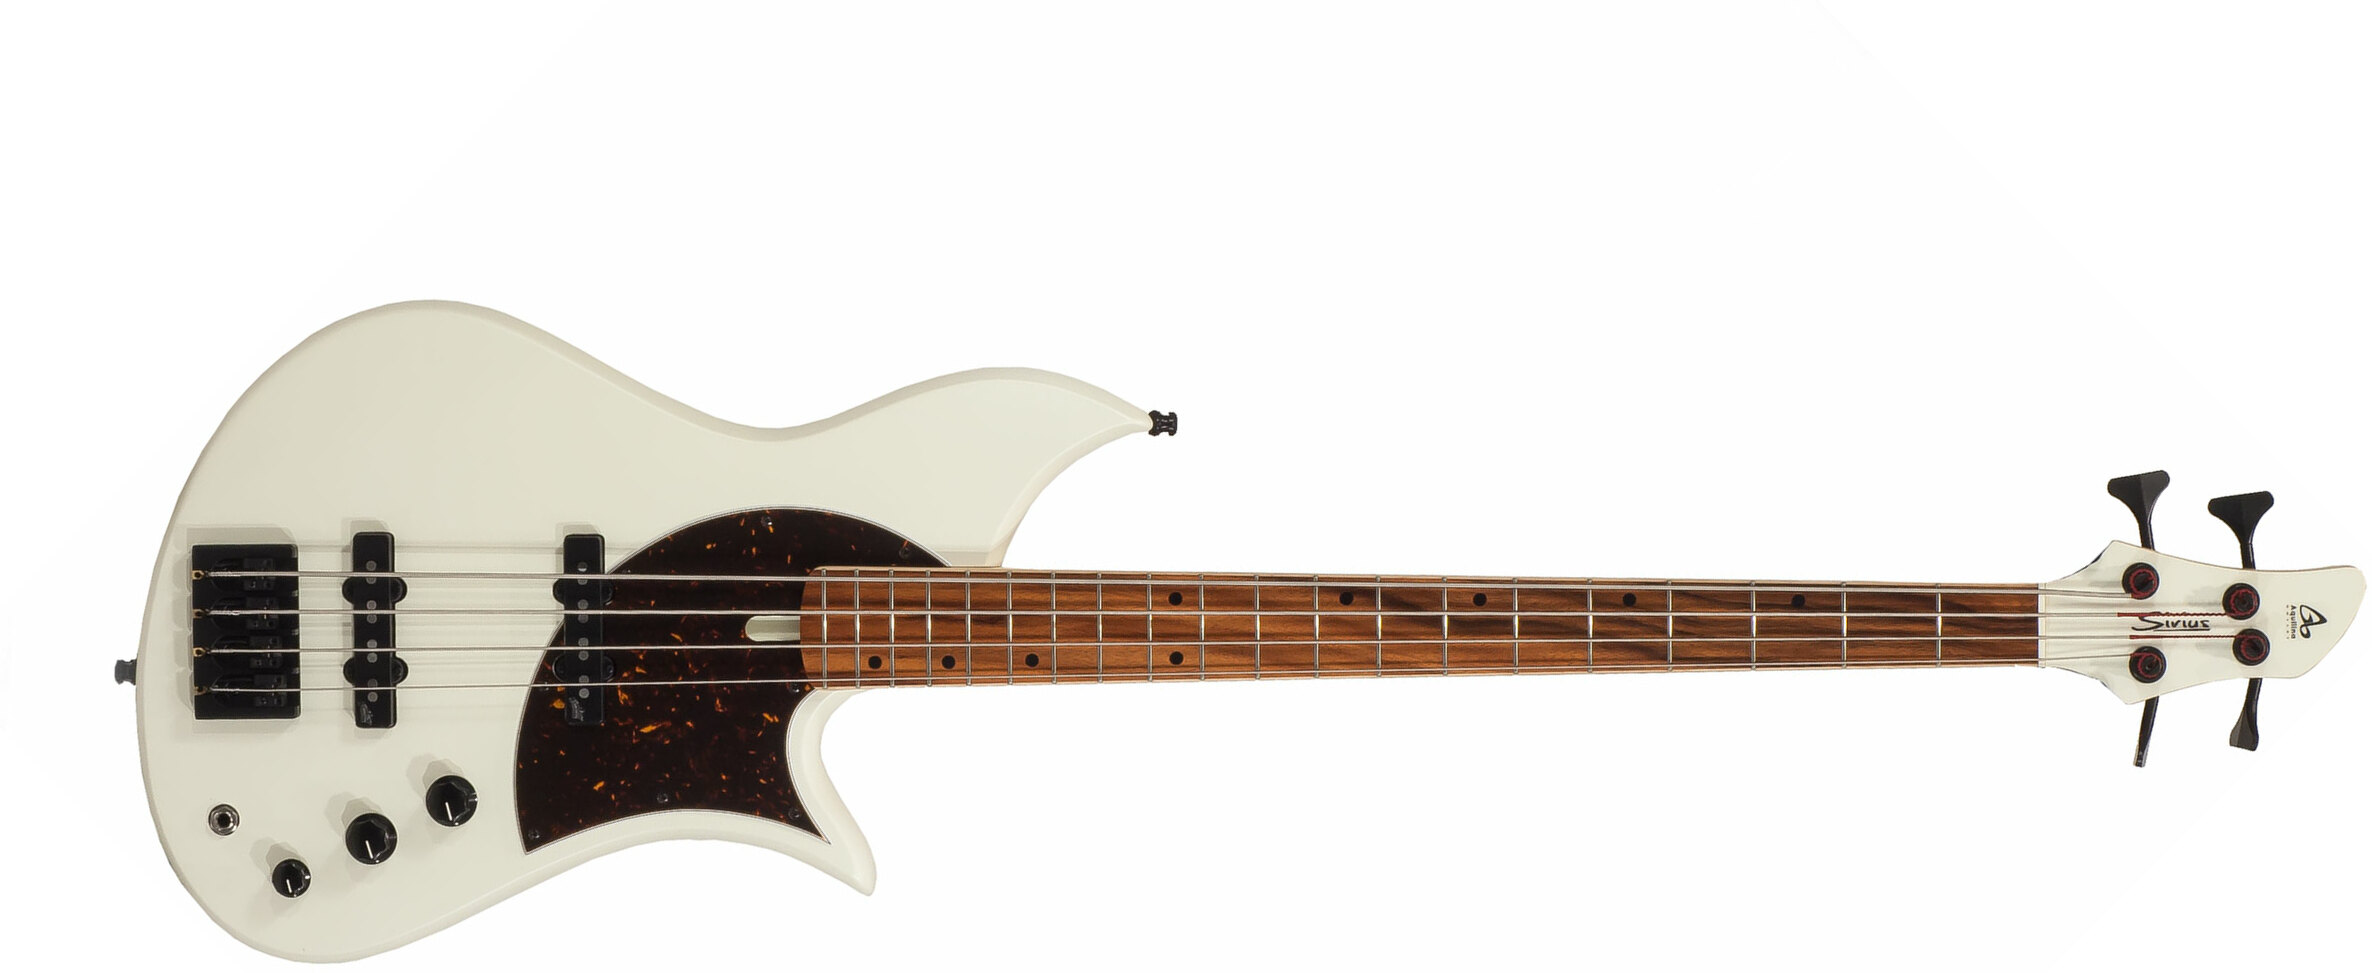 Aquilina Sirius 4 Standard Rw - White - Solid body electric bass - Main picture